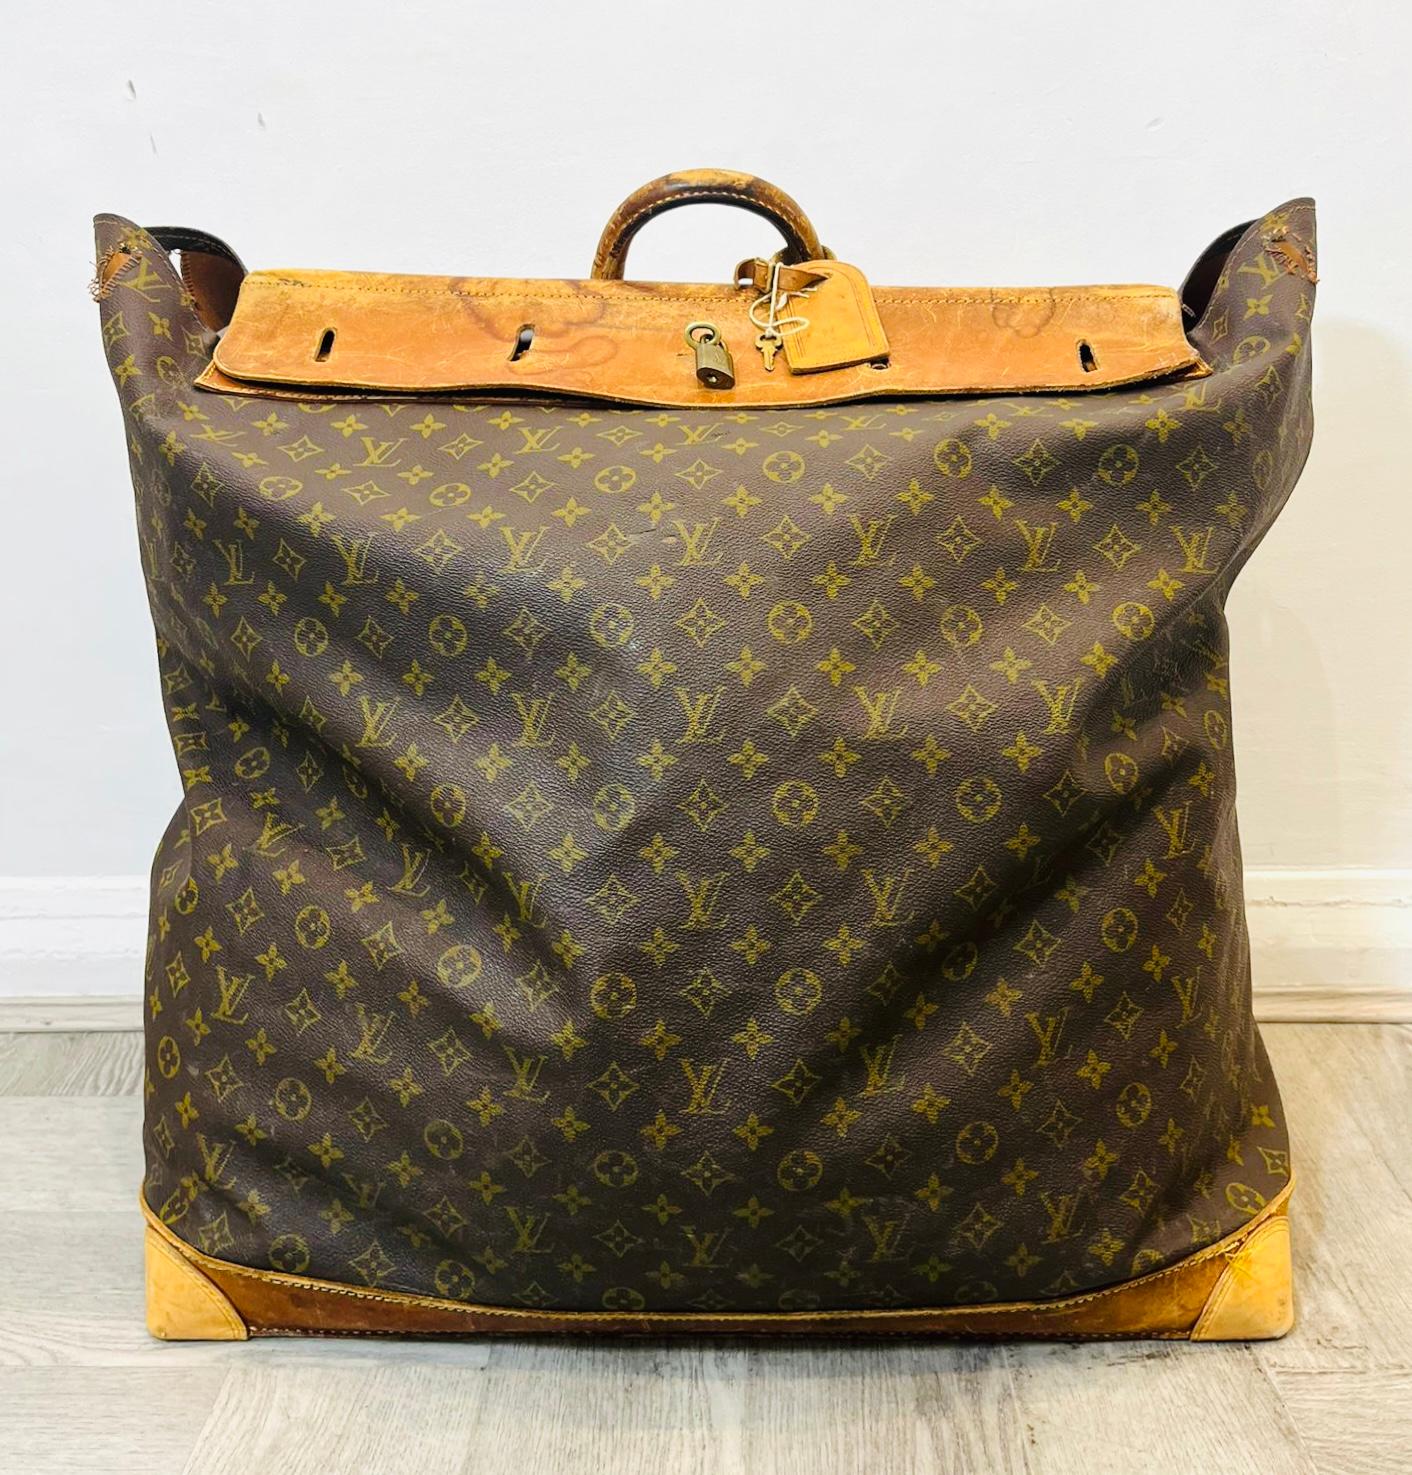 Louis Vuitton Vintage Monogram Canvas Steamer Travel Bag

Iconic brown monogram canvas bag detailed with tan leather base and top.

Designed in rectangular shape with padlock and key closure having 'Louis Vuitton' logo engraved.

Featuring leather